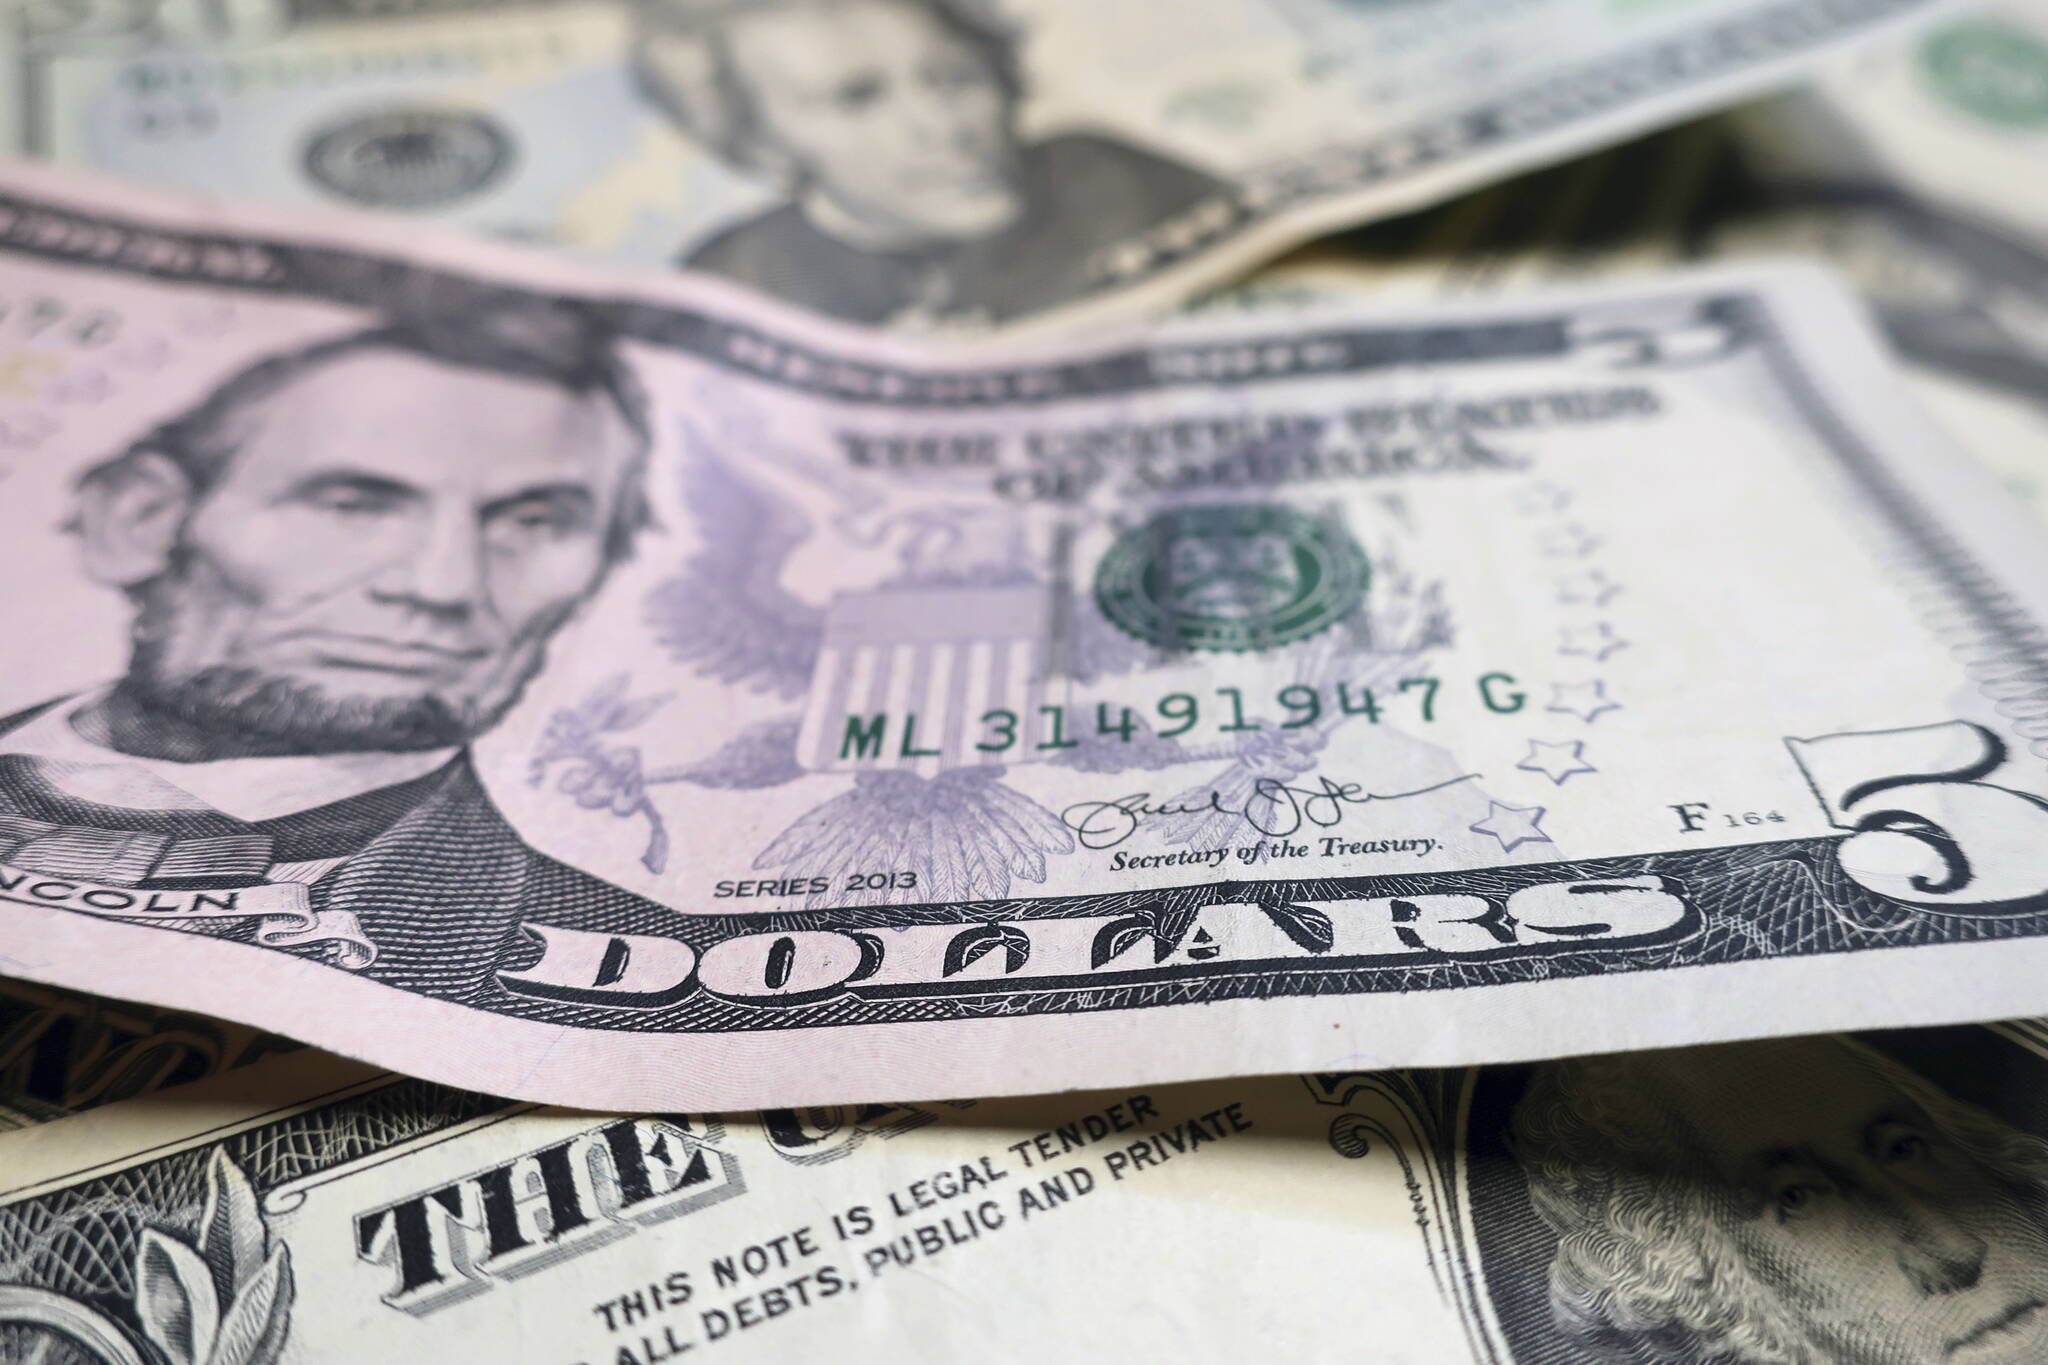 Alaska’s state legislators are slated to get the equivalent of 6,720 additional $5 bills in their salary next year via a $33,600 raise to a total of $84,000 due to a veto Monday by Gov. Mike Dunleavy of bill rejecting raises for legislative and executive branch employees. (AP Photo/Ted Shaffrey, File)